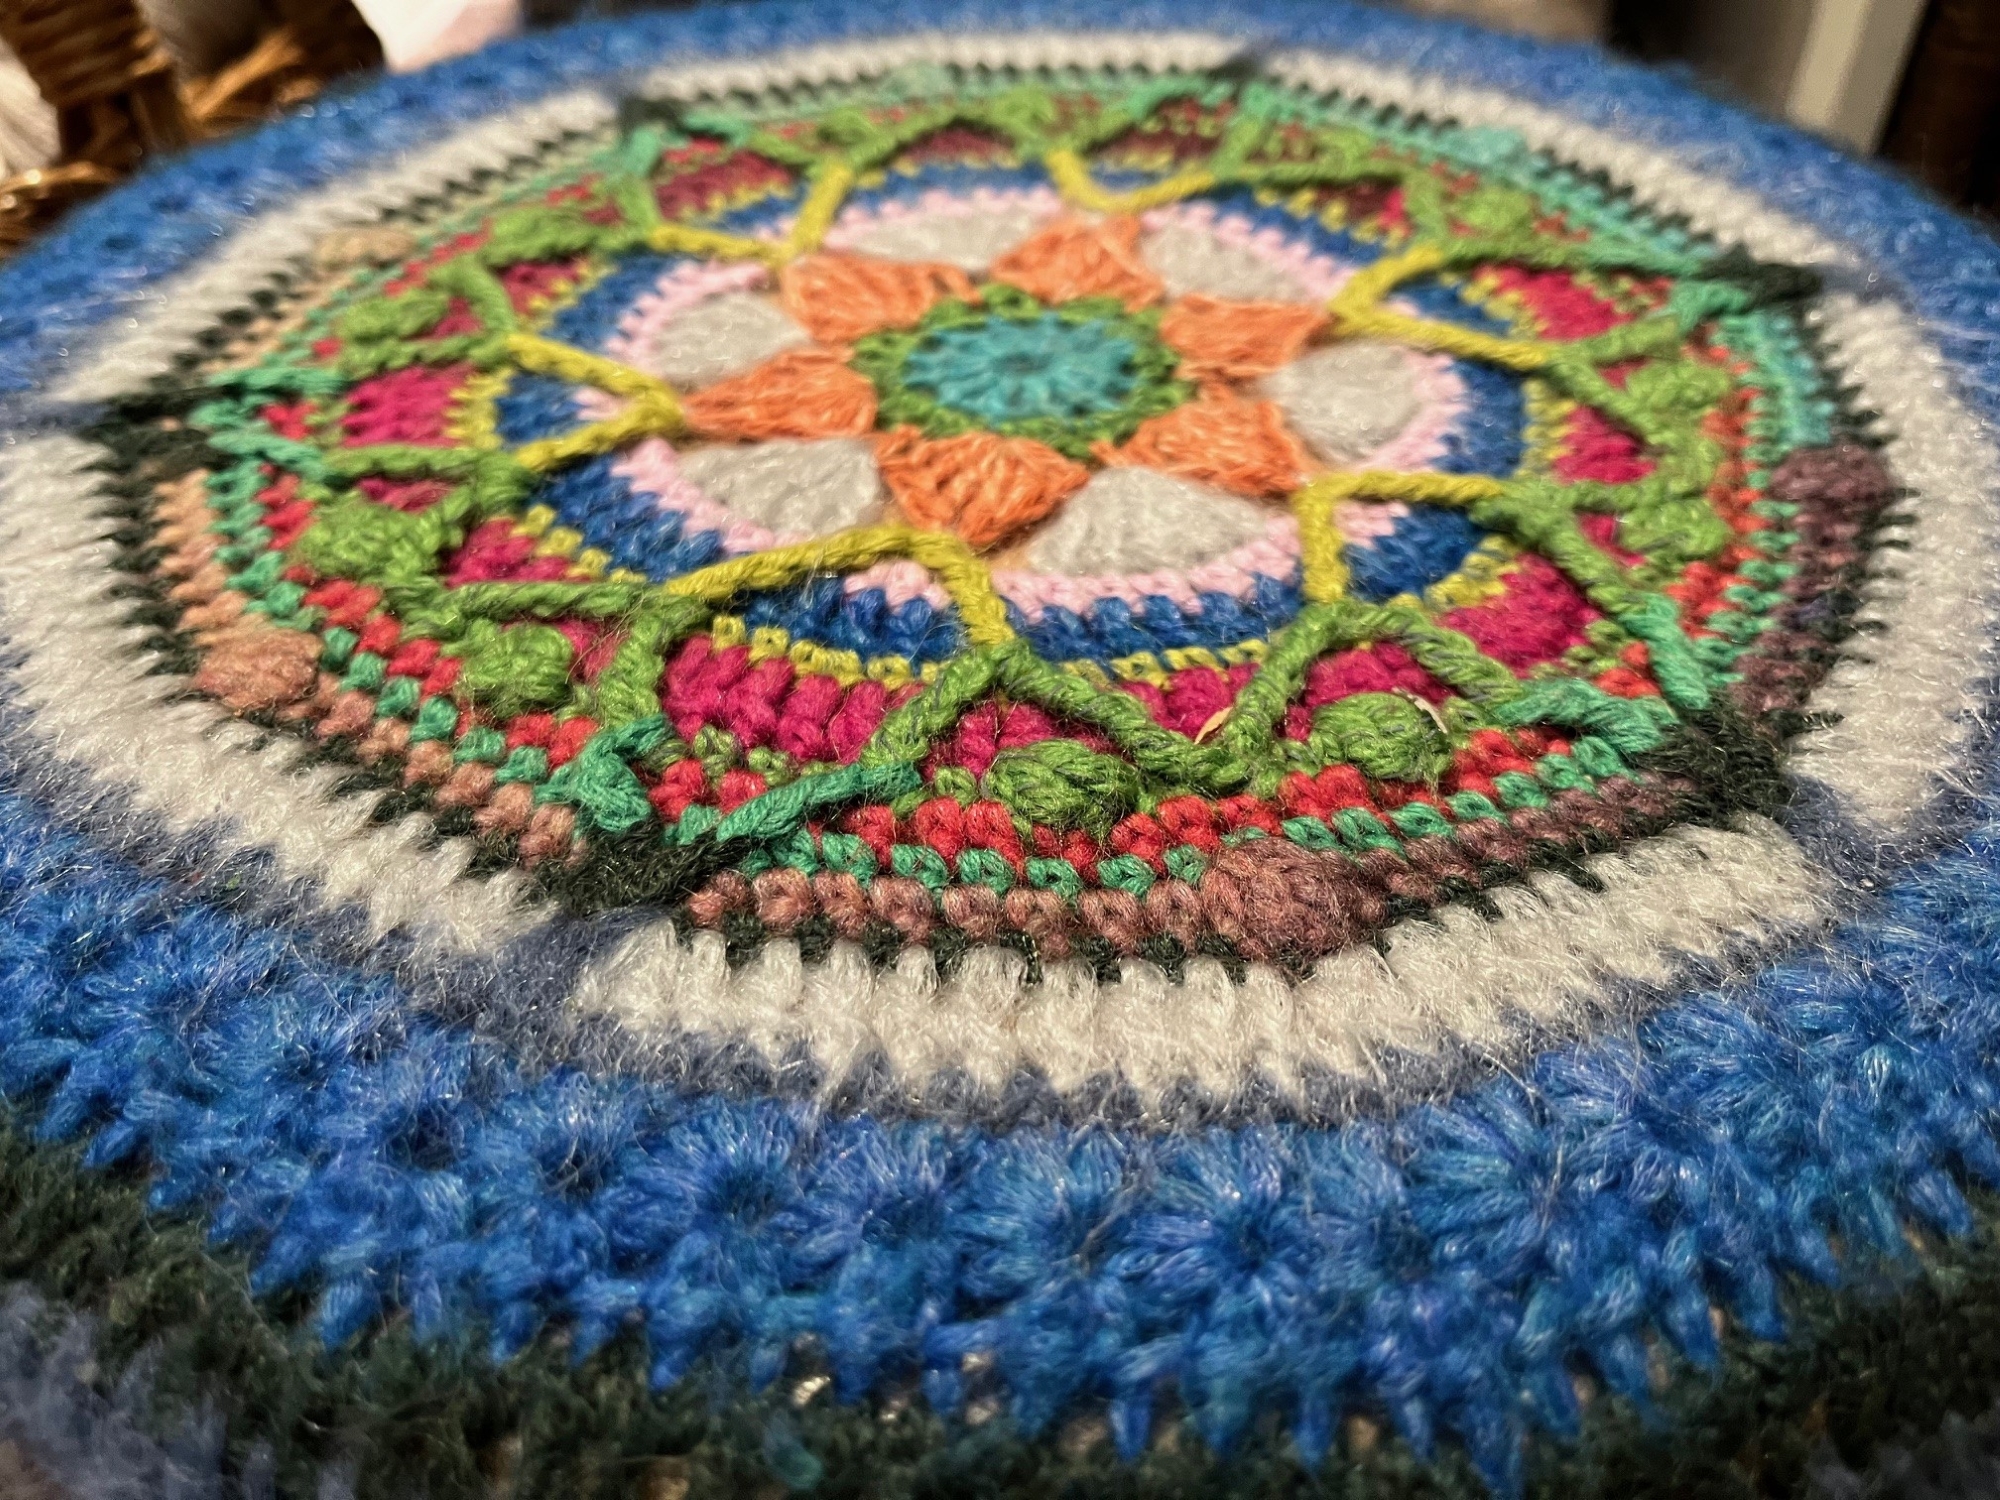 A colourful round piece of fabric made of yarn.